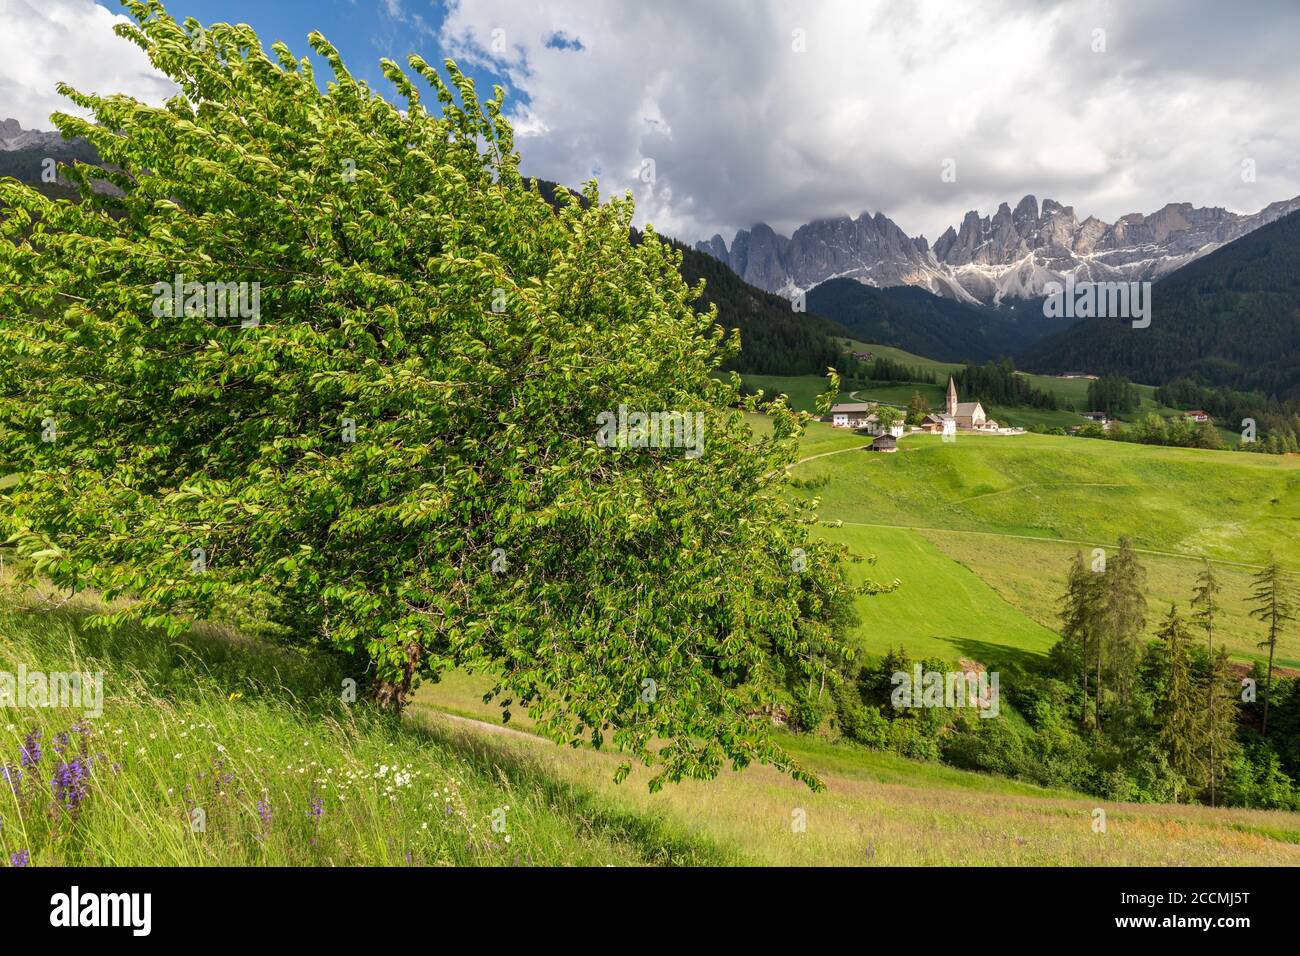 Wide angle view of anItalian valley, with a tree in the foreground and a small church surrounded by meadows and trees and mountains in the distance Stock Photo